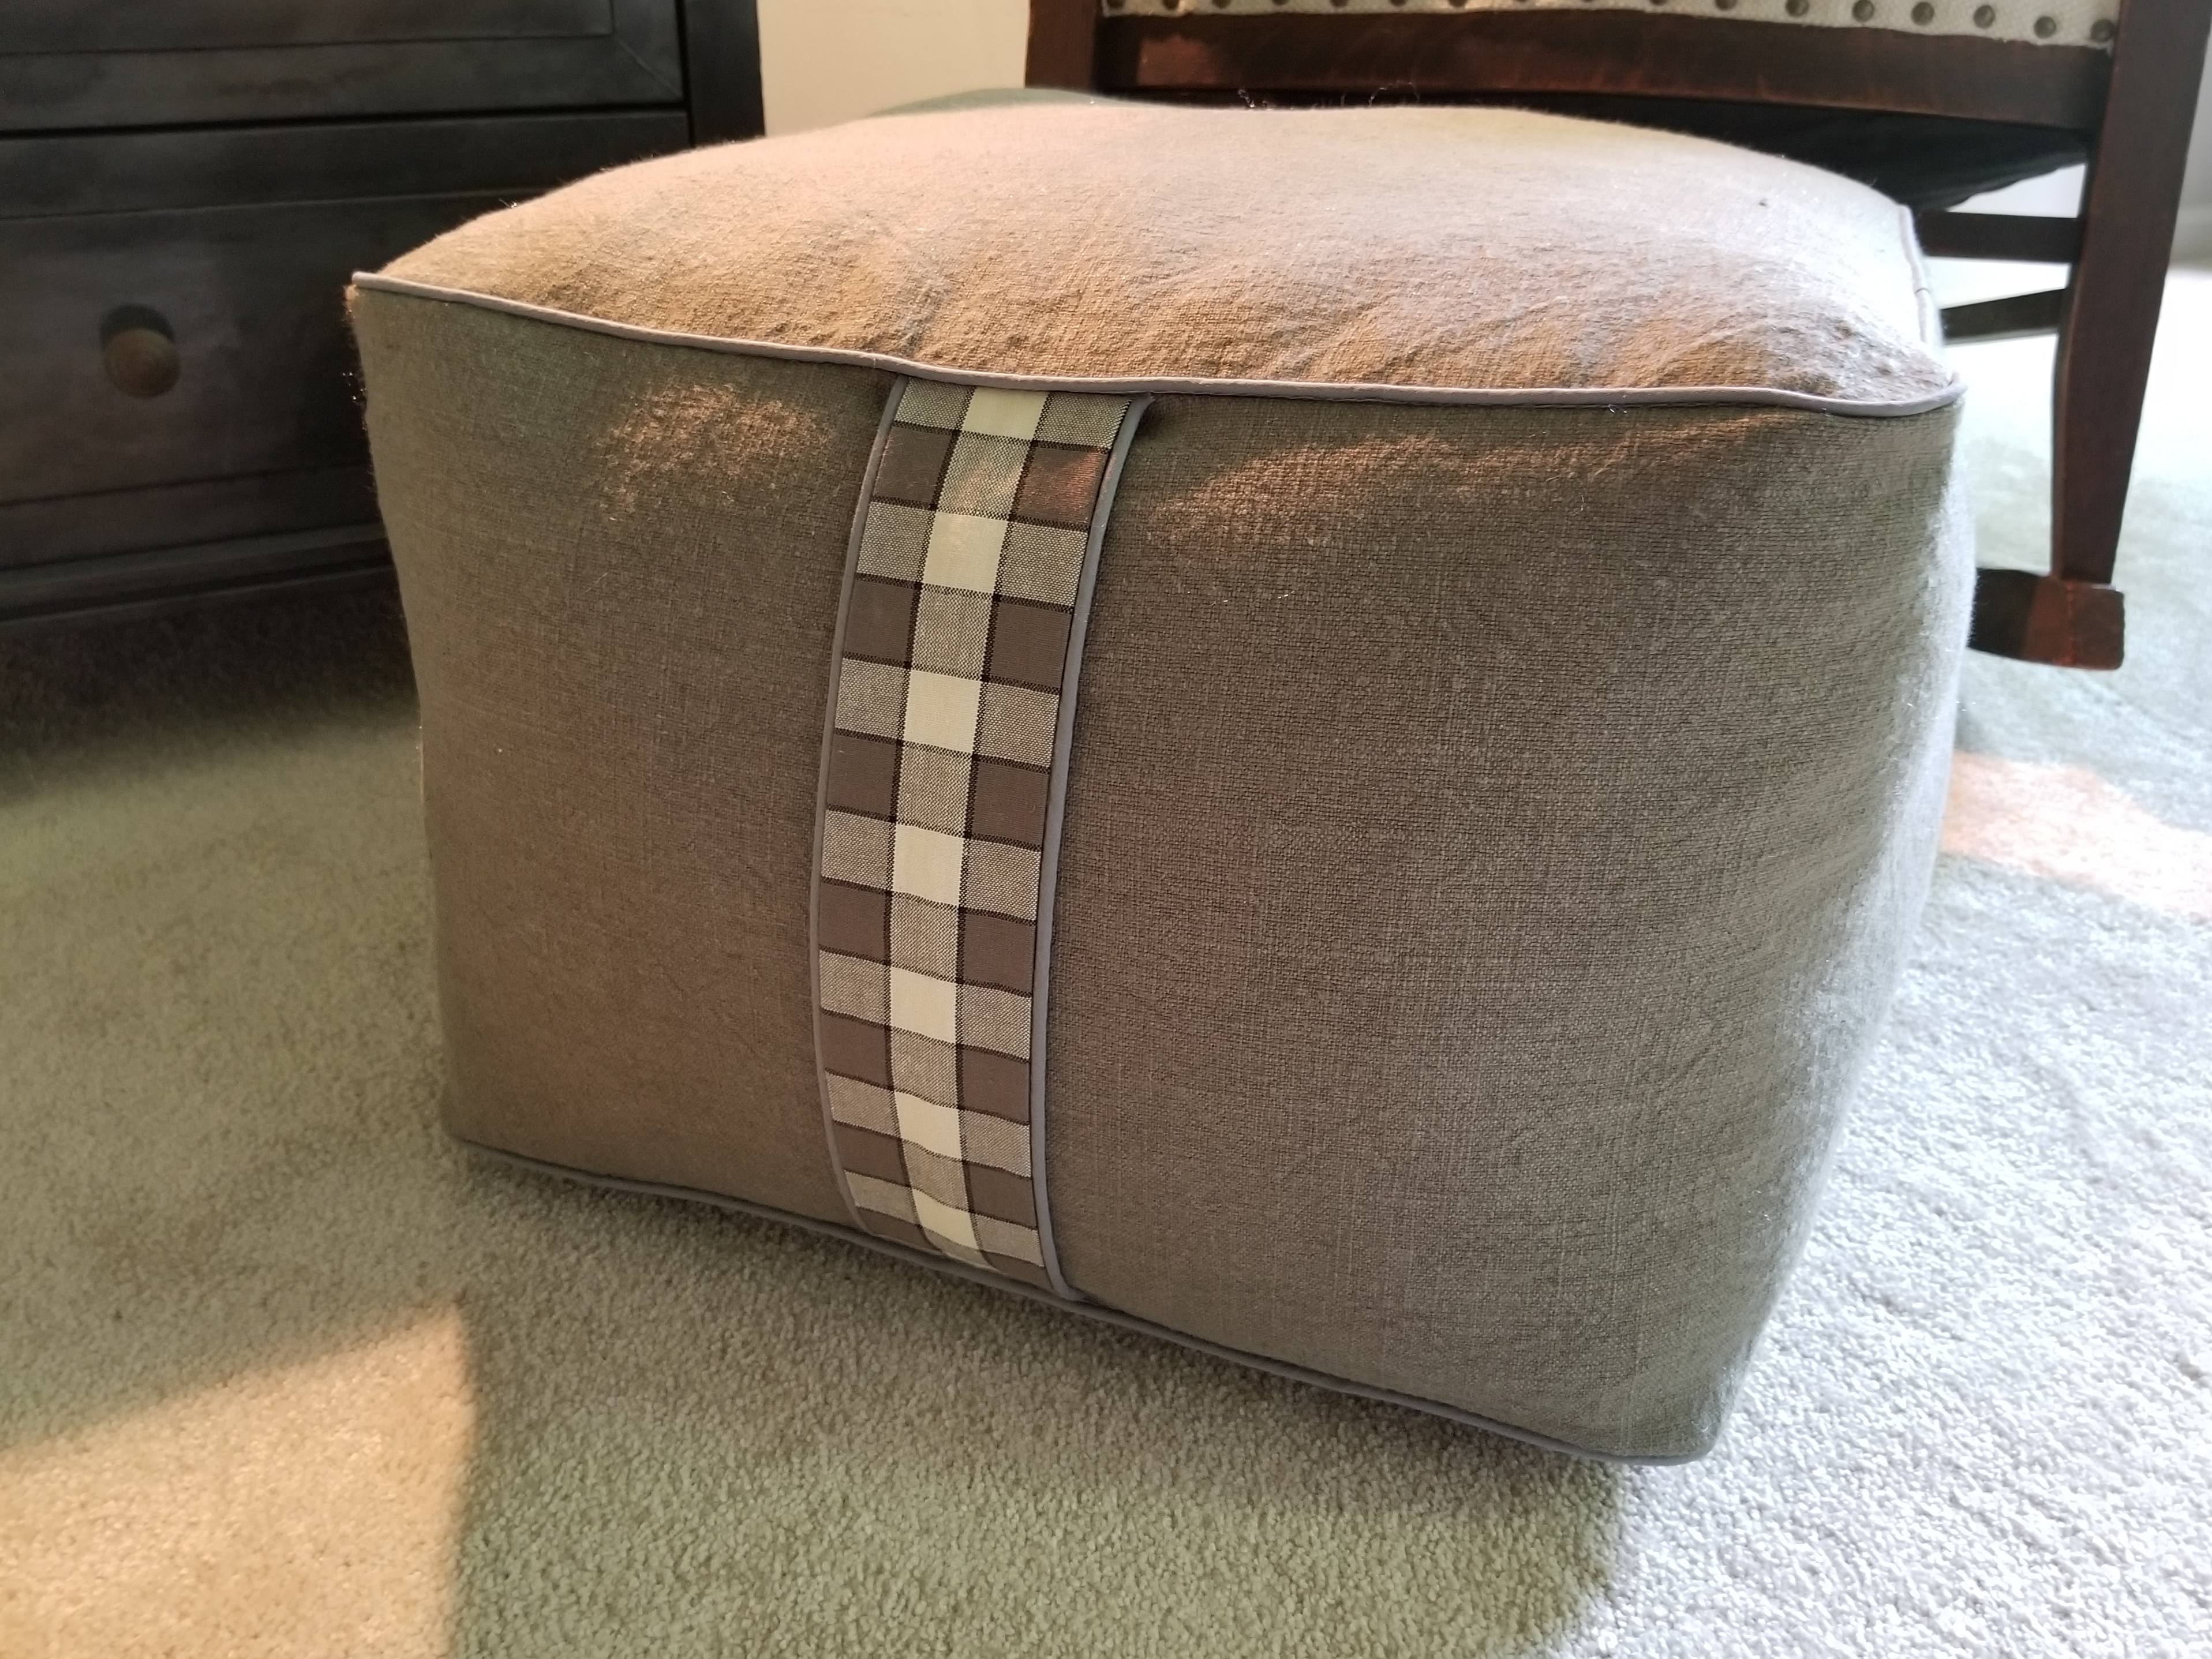 Save money with a DIY pouf 